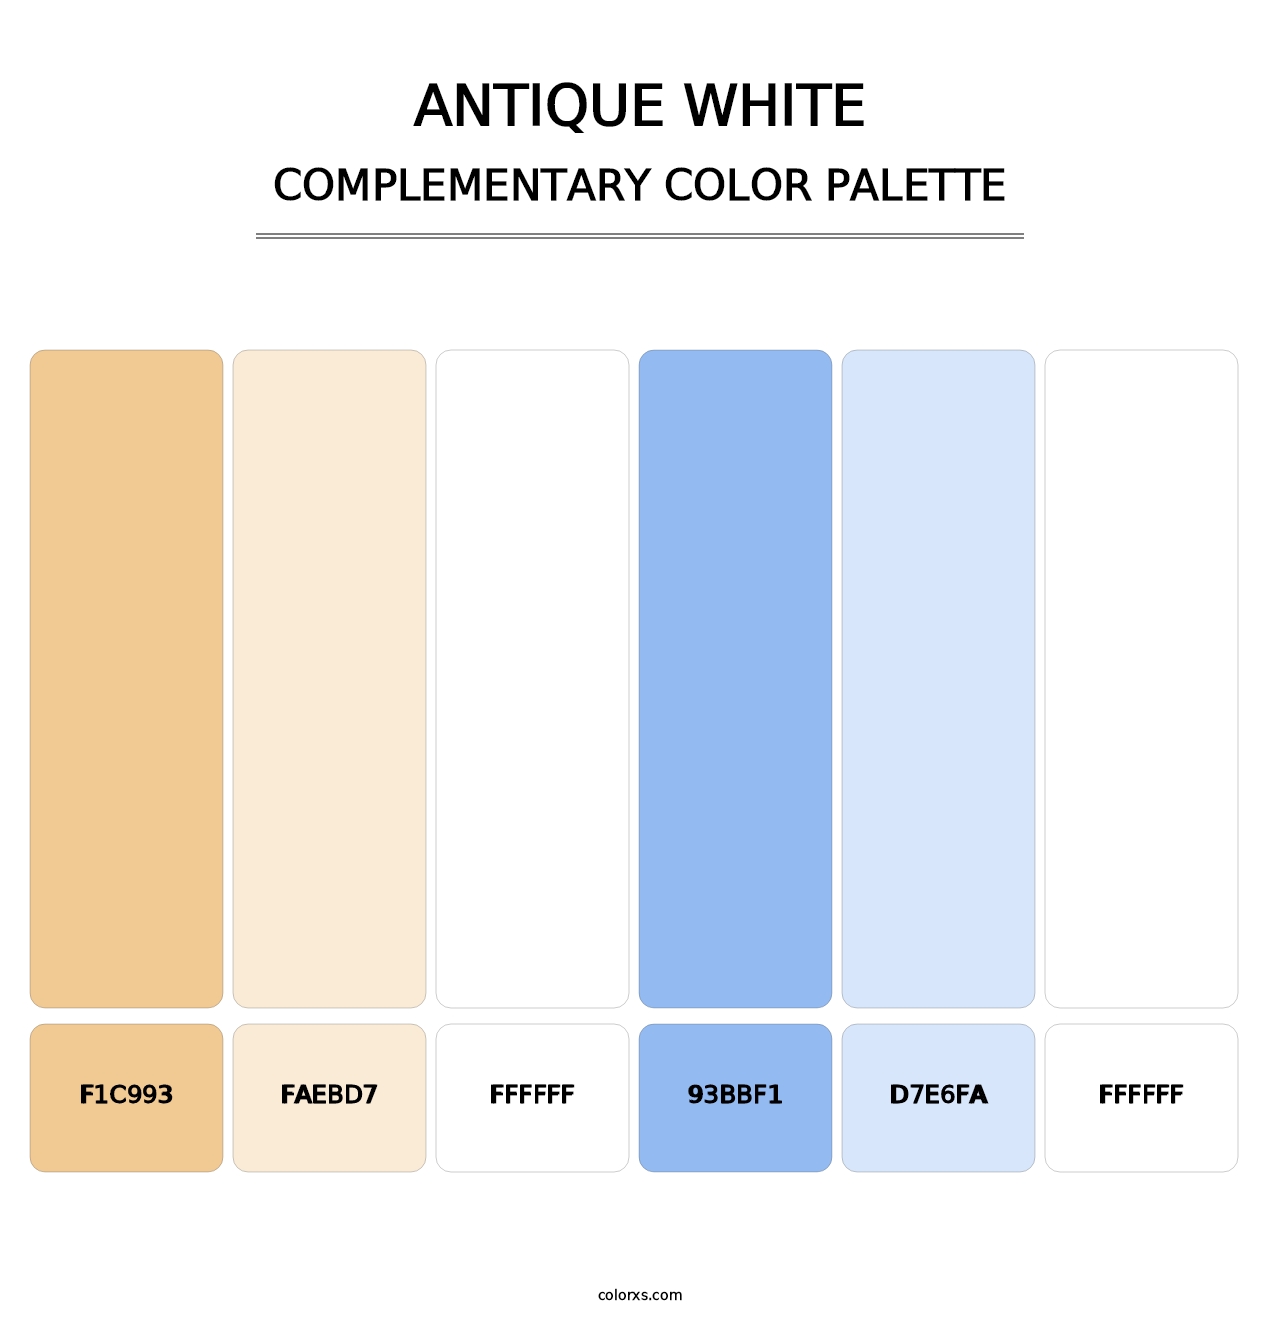 Antique White - Complementary Color Palette